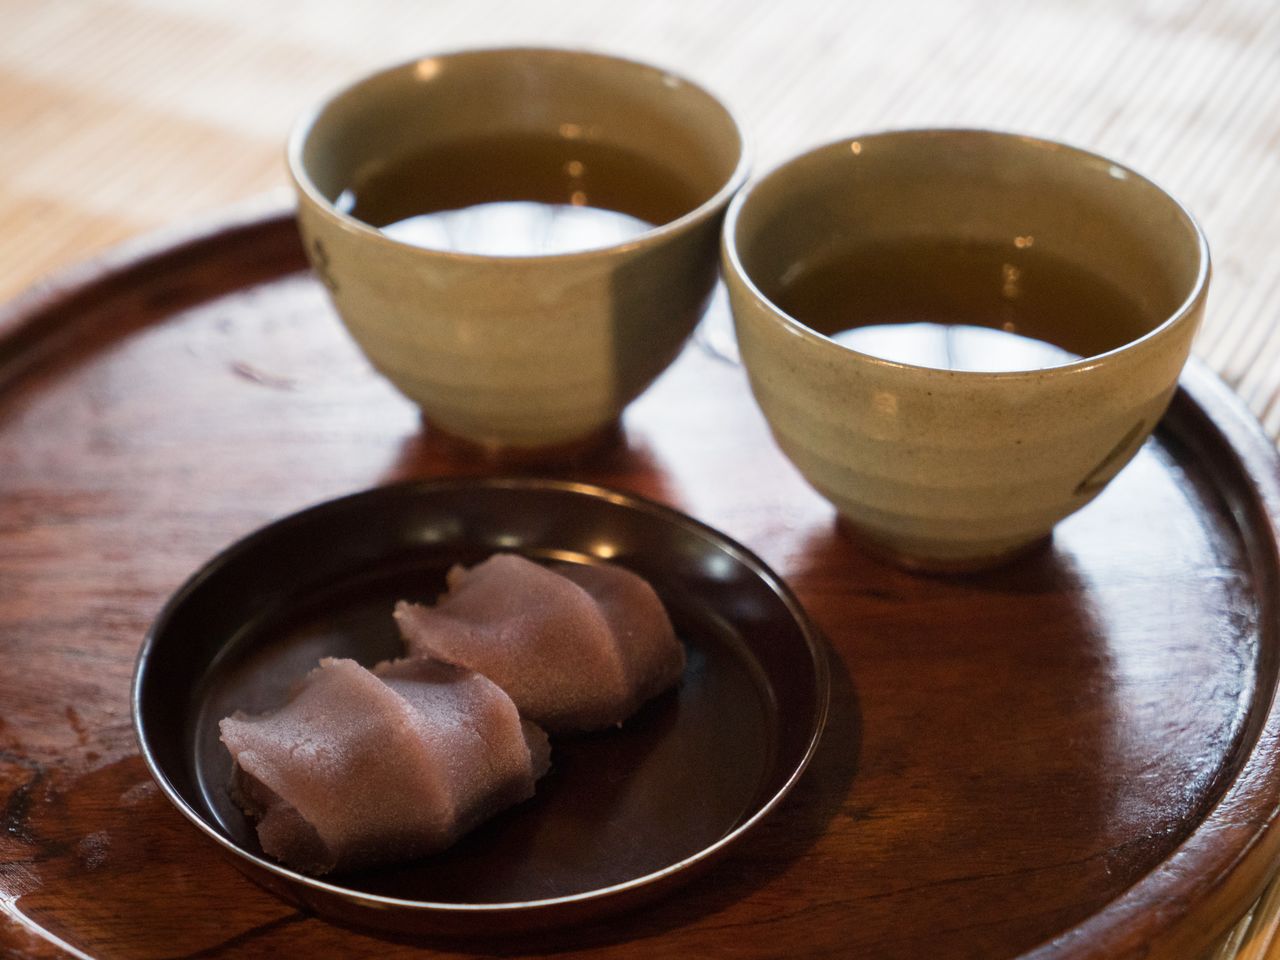 Akafuku <em>mochi</em> rice cakes, wrapped in koshi-an bean jam. Here the mochi are served with cups of <em>bancha</em> (coarse Japanese tea), for eating on the premises.